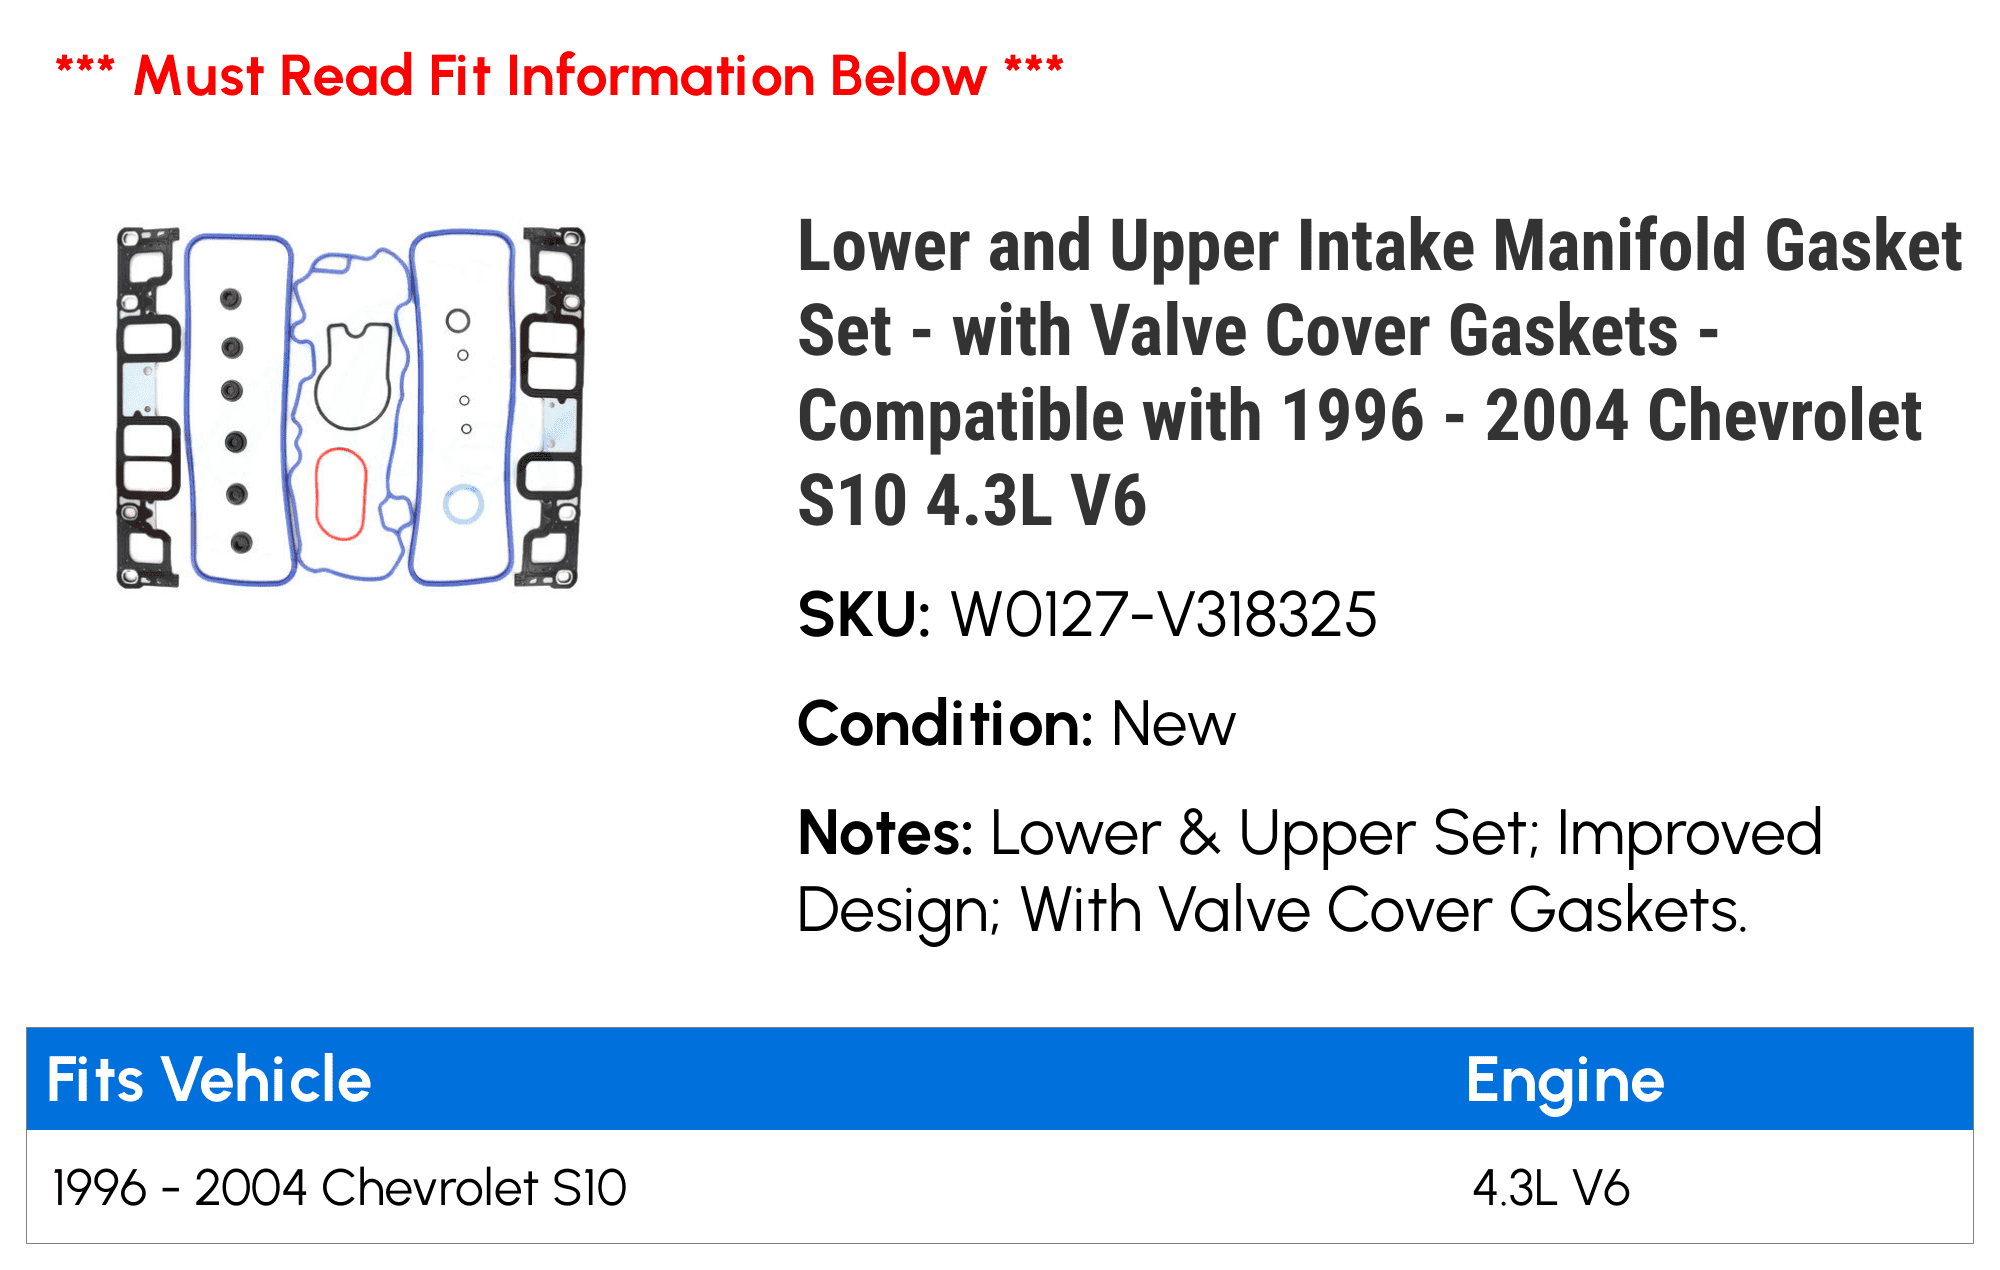 Lower and Upper Intake Manifold Gasket Set with Valve Cover Gaskets  Compatible with 1996 2004 Chevy S10 4.3L V6 1997 1998 1999 2000 2001 2002  2003